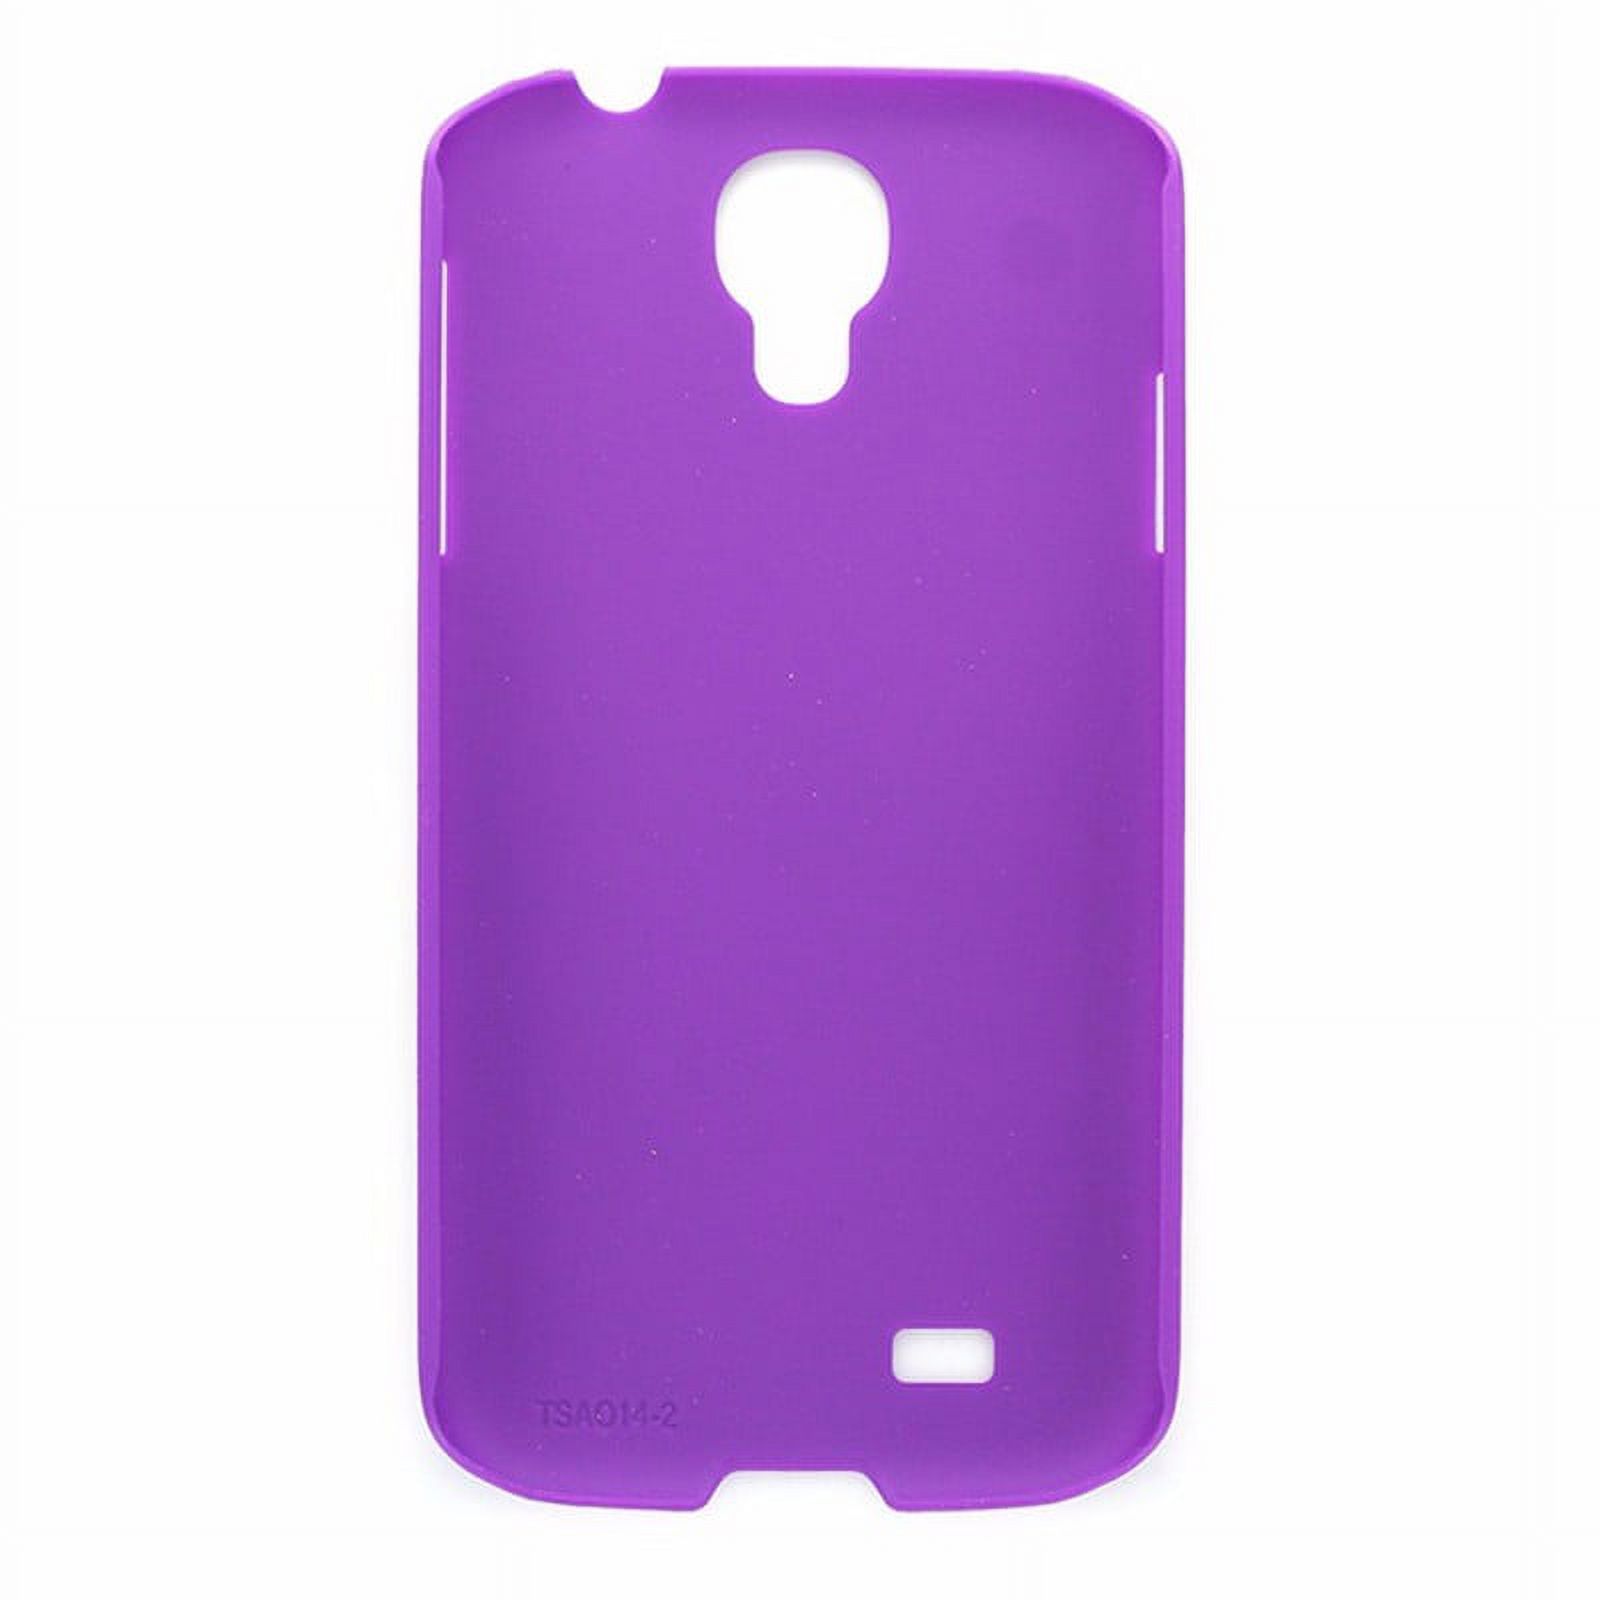 Wireless Xcessories Incipio Feather Case for Samsung Galaxy S4, Royal Purple - image 2 of 2